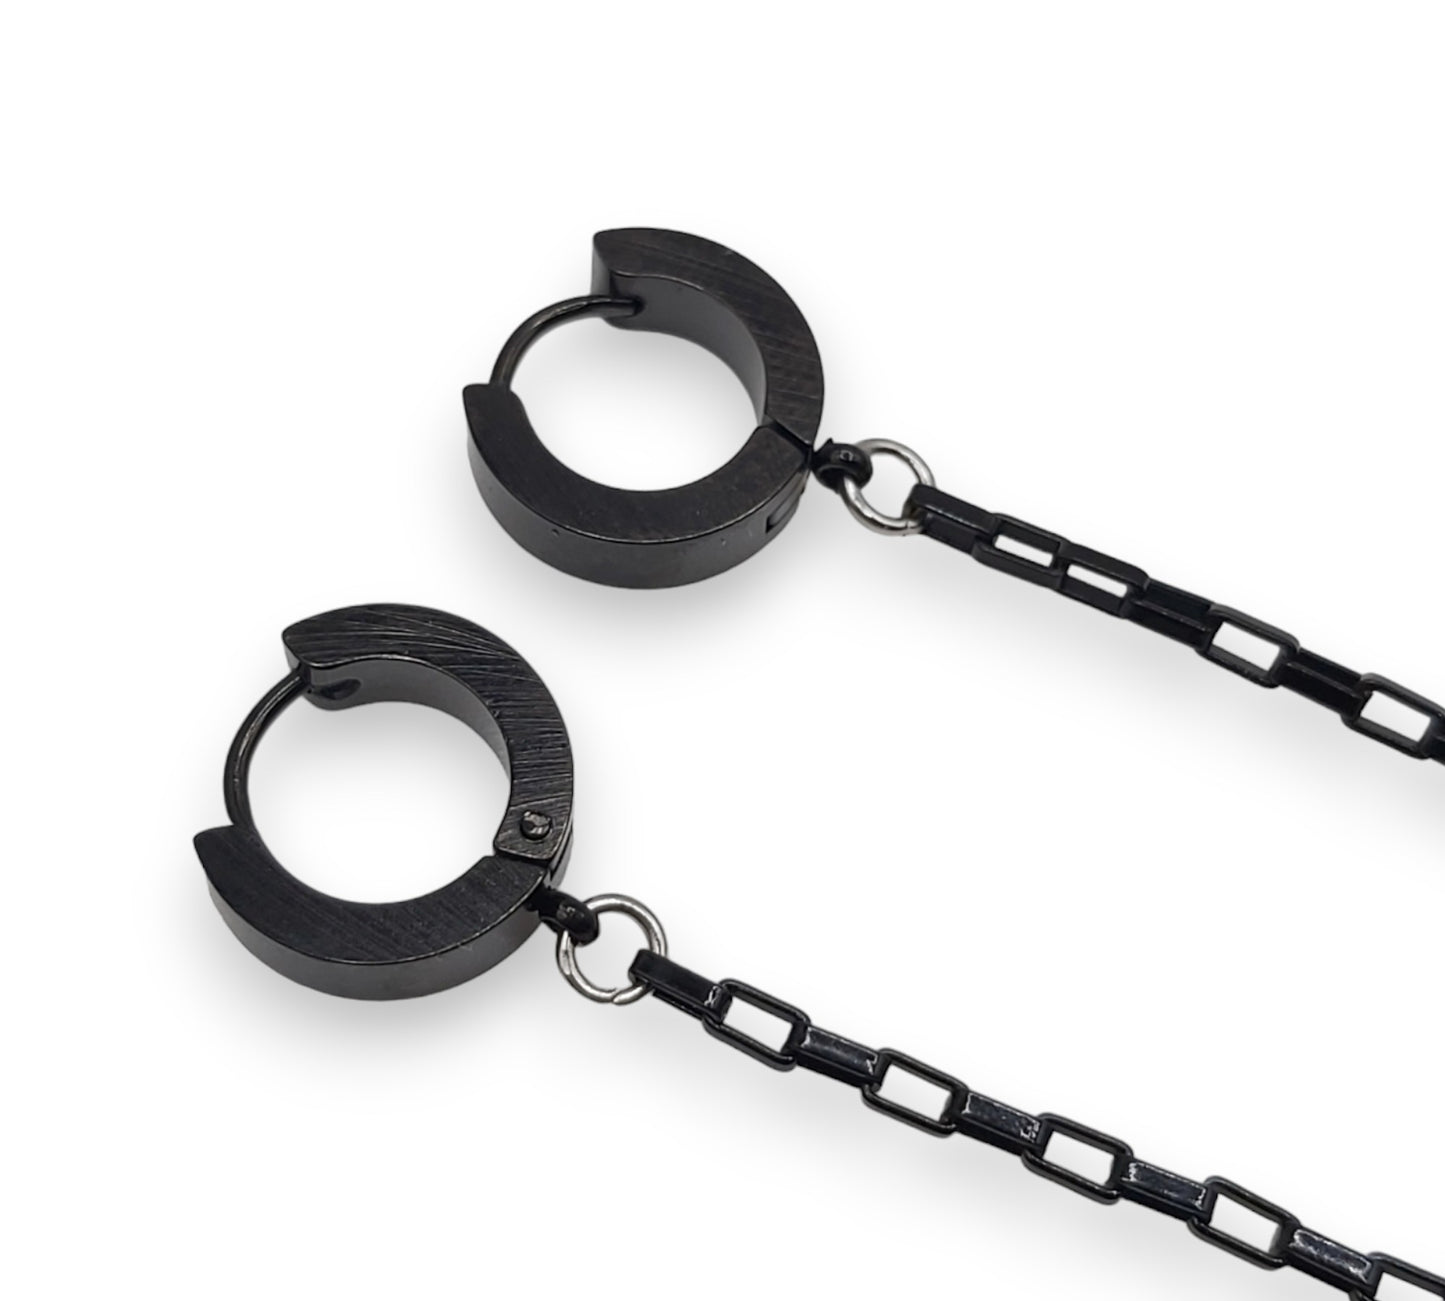 Black Cable Chain EarLinks - Wireless Earbuds